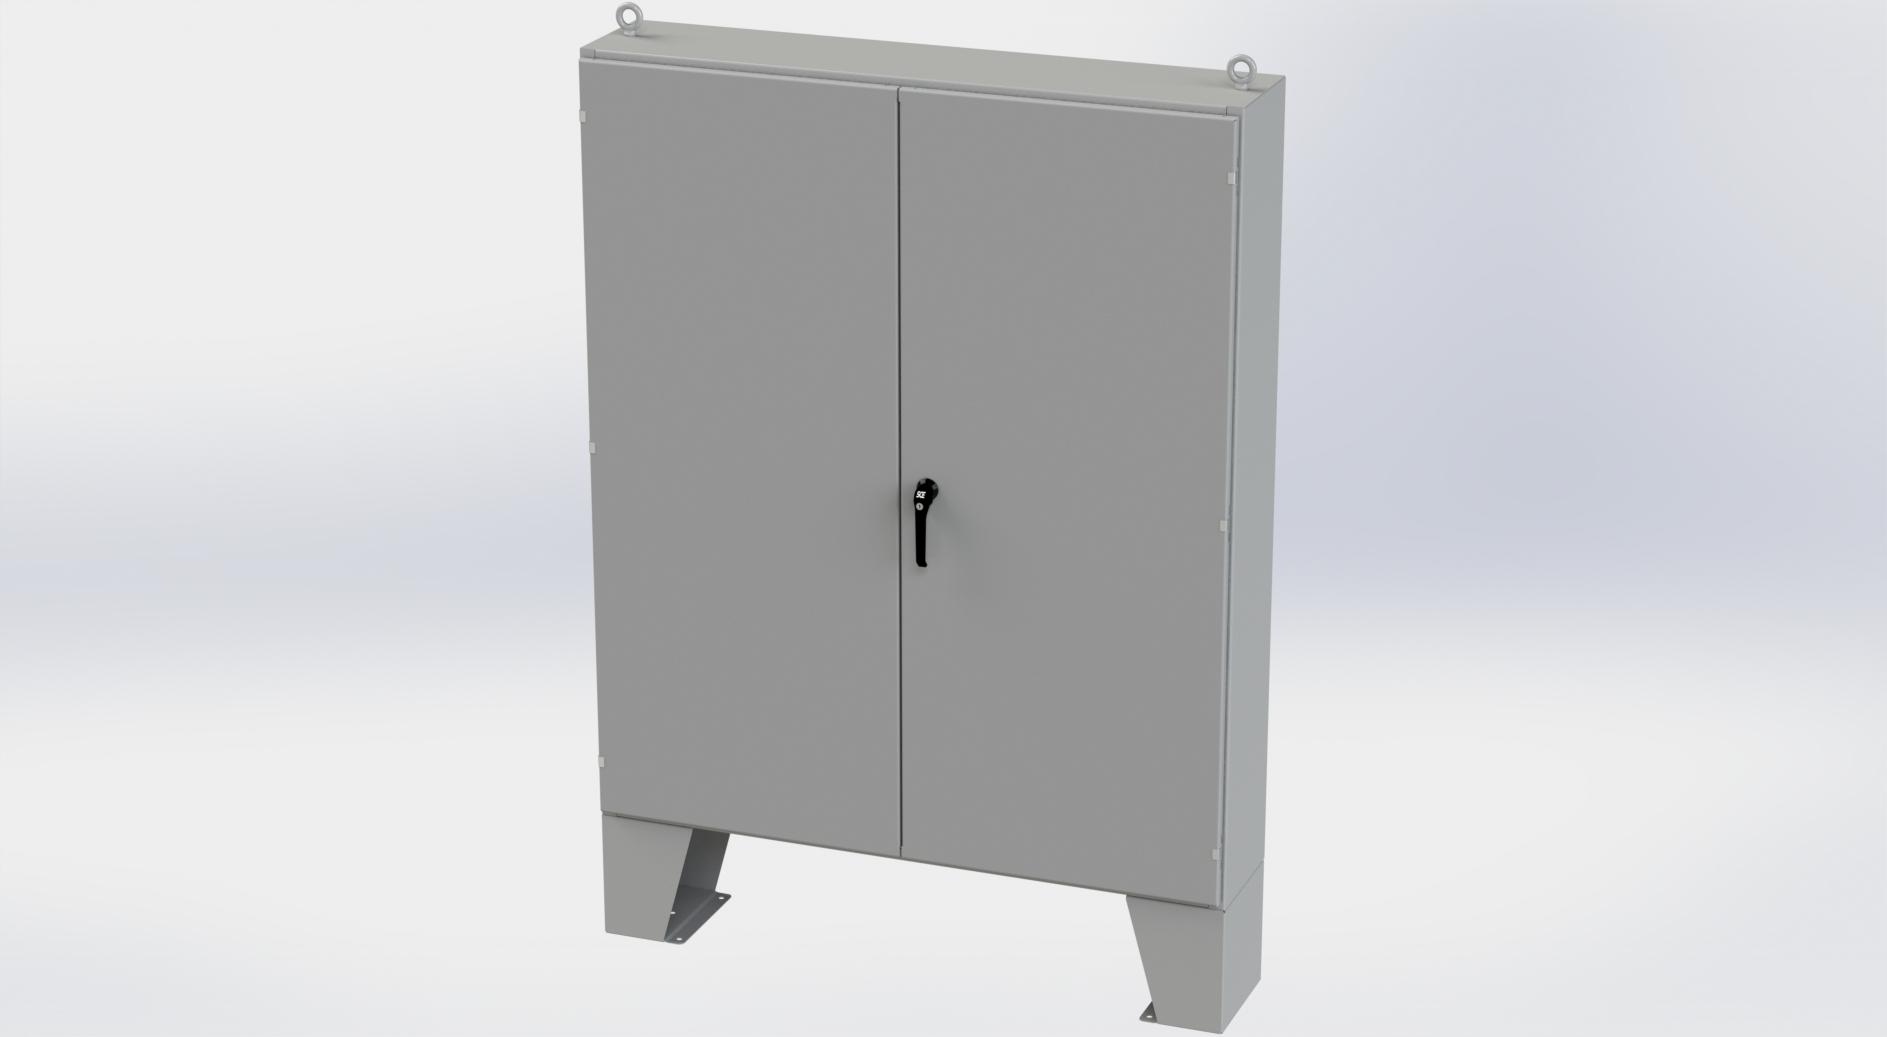 Saginaw Control SCE-726012ULP 2DR LP Enclosure, Height:72.00", Width:60.00", Depth:12.00", ANSI-61 gray powder coating inside and out. Optional sub-panels are powder coated white.